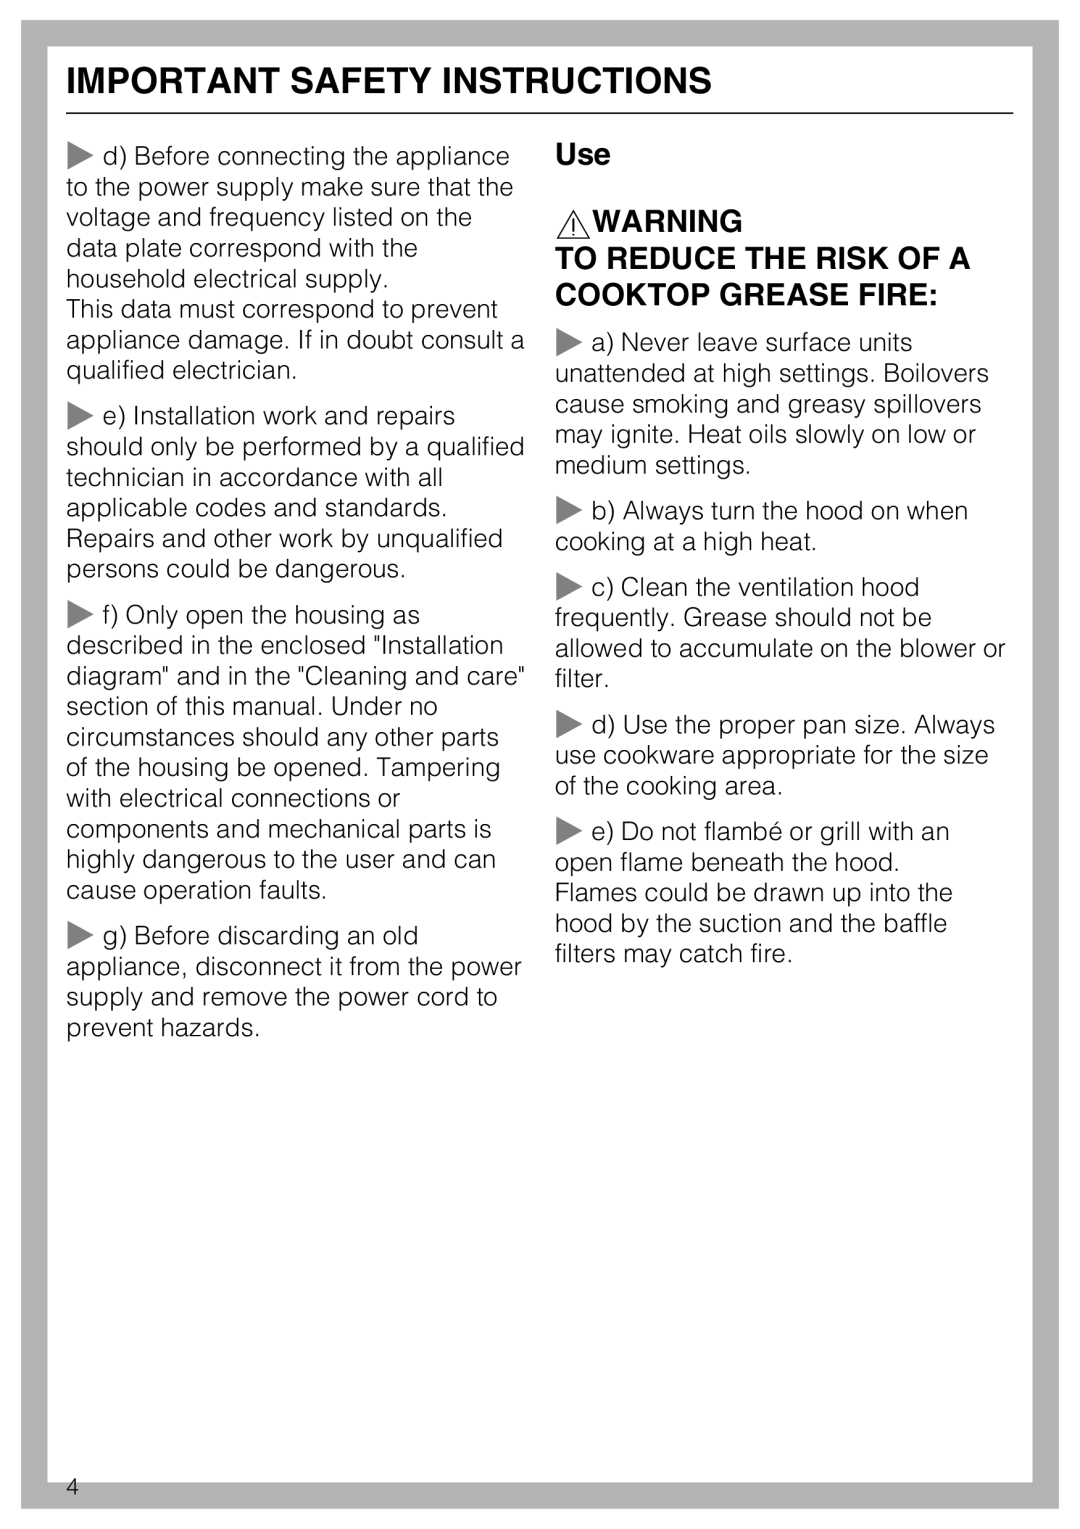 Miele 09 824 260 installation instructions To Reduce The Risk Of A Cooktop Grease Fire, Important Safety Instructions 